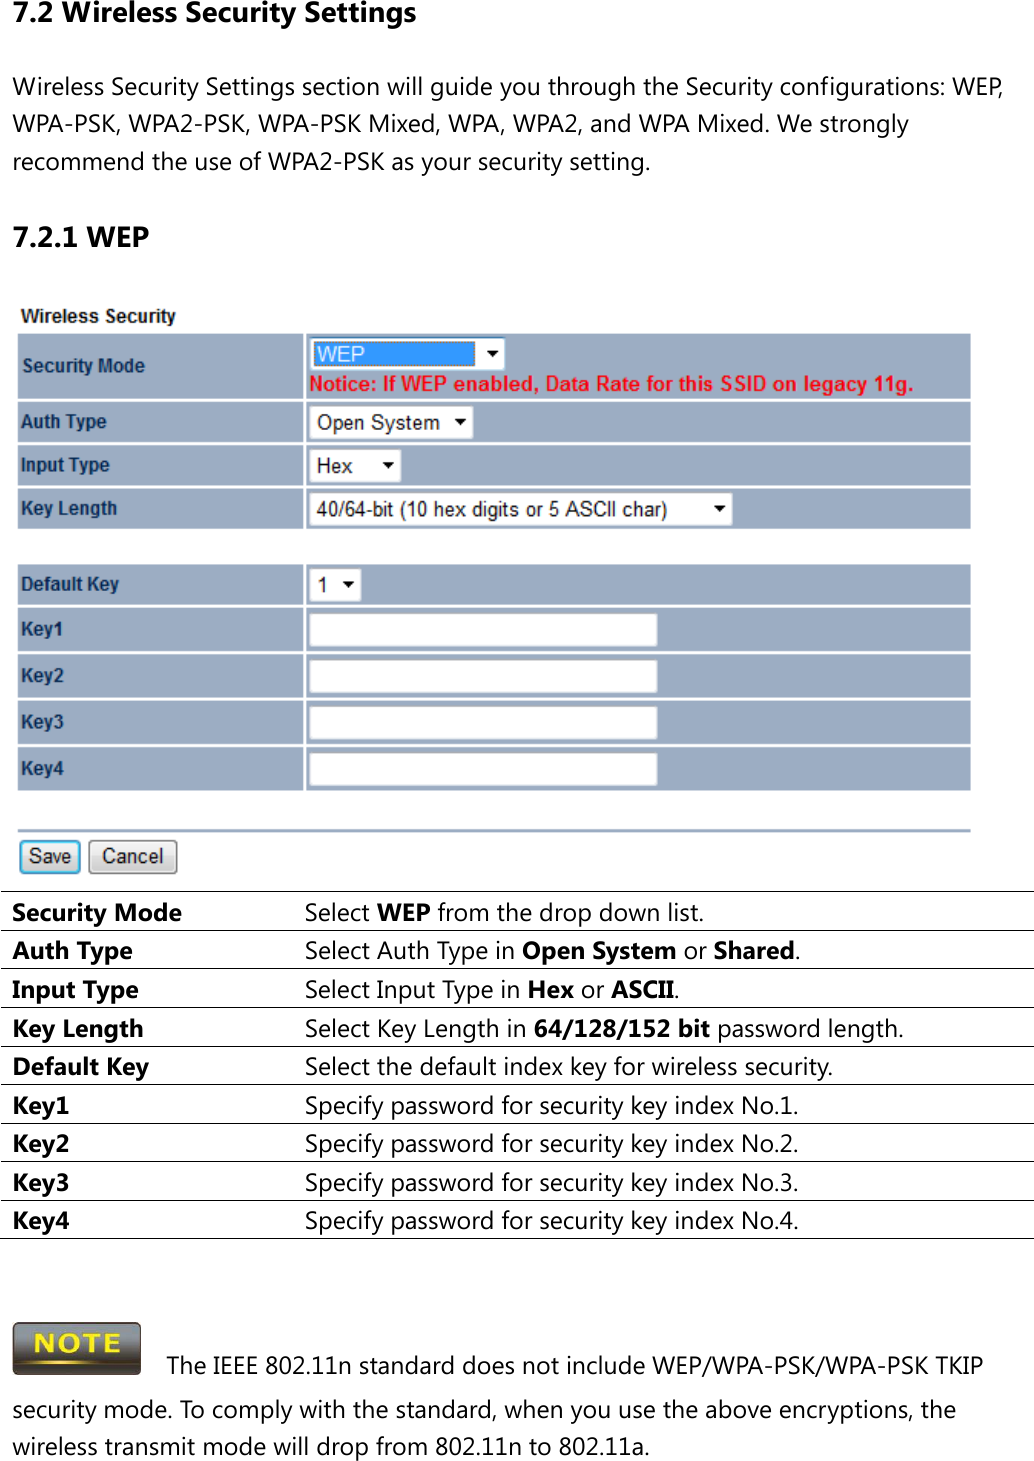 7.2 Wireless Security Settings Wireless Security Settings section will guide you through the Security configurations: WEP, WPA-PSK, WPA2-PSK, WPA-PSK Mixed, WPA, WPA2, and WPA Mixed. We strongly recommend the use of WPA2-PSK as your security setting. 7.2.1 WEP  Security Mode Select WEP from the drop down list. Auth Type Select Auth Type in Open System or Shared. Input Type Select Input Type in Hex or ASCII. Key Length Select Key Length in 64/128/152 bit password length. Default Key Select the default index key for wireless security. Key1 Specify password for security key index No.1. Key2 Specify password for security key index No.2. Key3 Specify password for security key index No.3. Key4 Specify password for security key index No.4.     The IEEE 802.11n standard does not include WEP/WPA-PSK/WPA-PSK TKIP security mode. To comply with the standard, when you use the above encryptions, the wireless transmit mode will drop from 802.11n to 802.11a.    